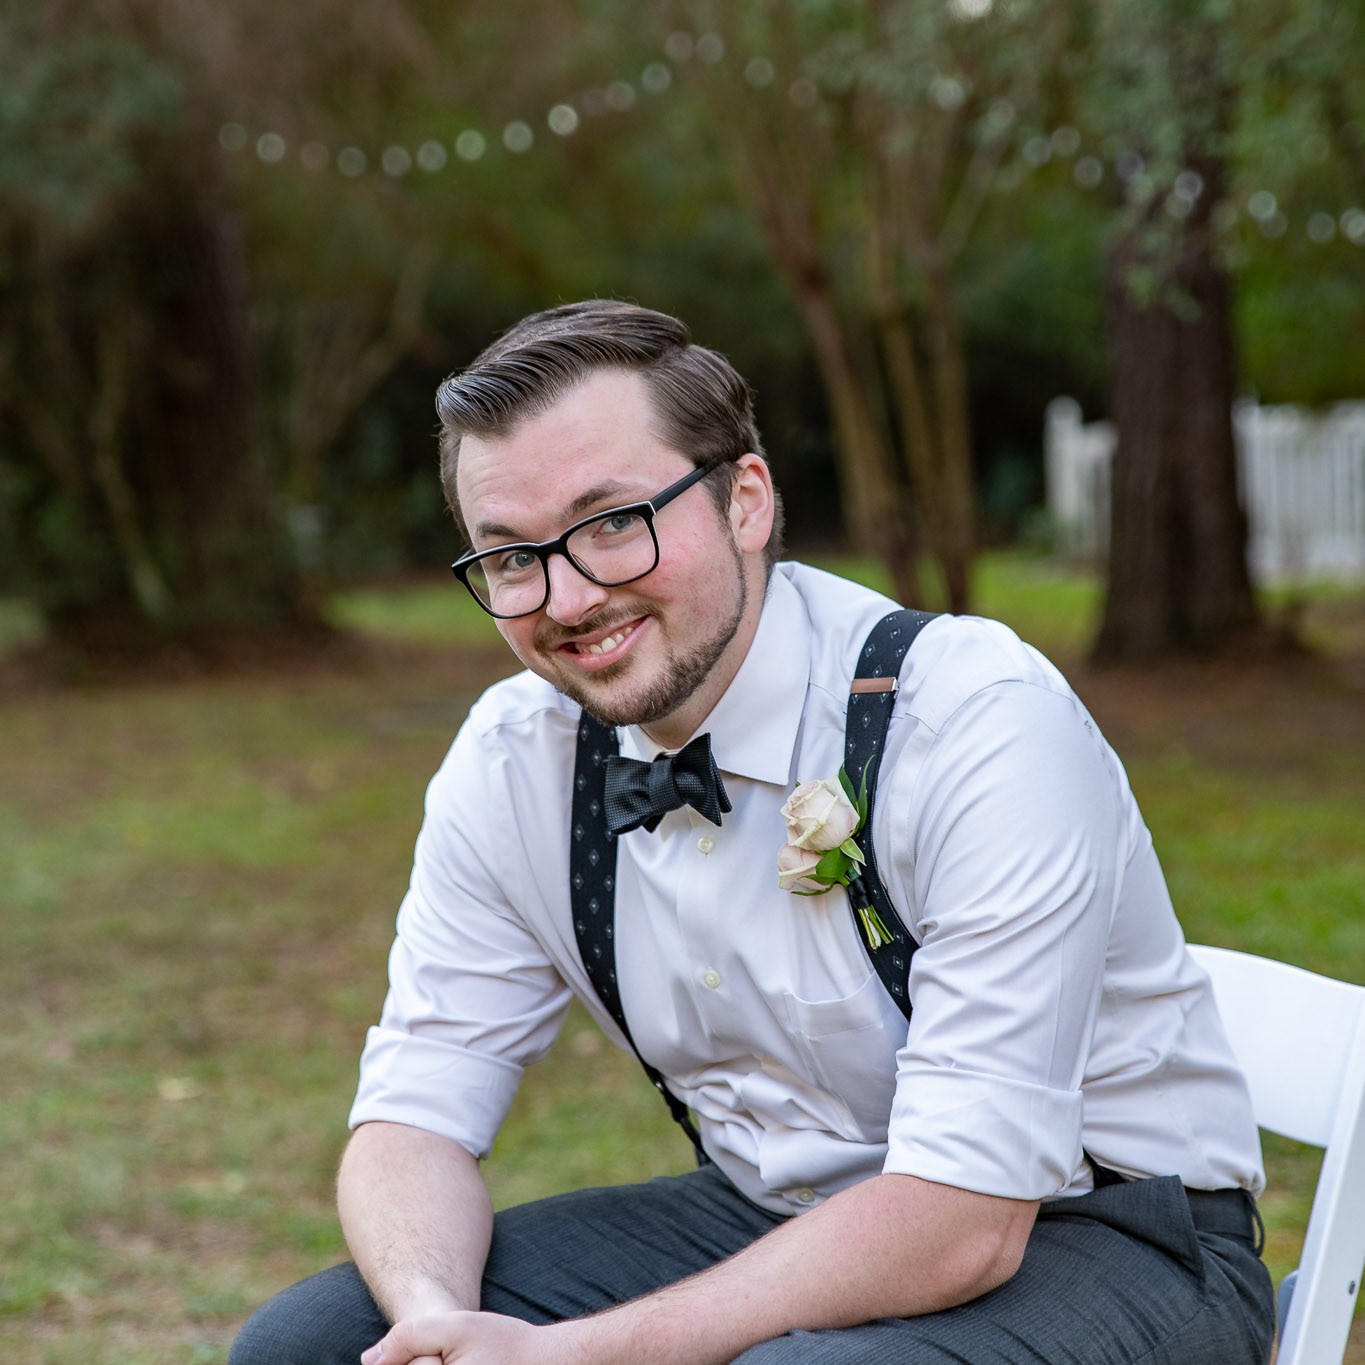 A photo of me! I'm seated outdoors on a white chair in mostly-formal dress, clad in gray trousers, a white french-cuffed shirt rolled up to the elbows, black suspenders, a black bow tie, and my usual crisp pompadour haircut. I'm beaming-- a huge grin is hardly hidden by my short beard and mustache, and my eyes smile out from behind huge black-framed glasses. A white carnation clings to one suspender strap.